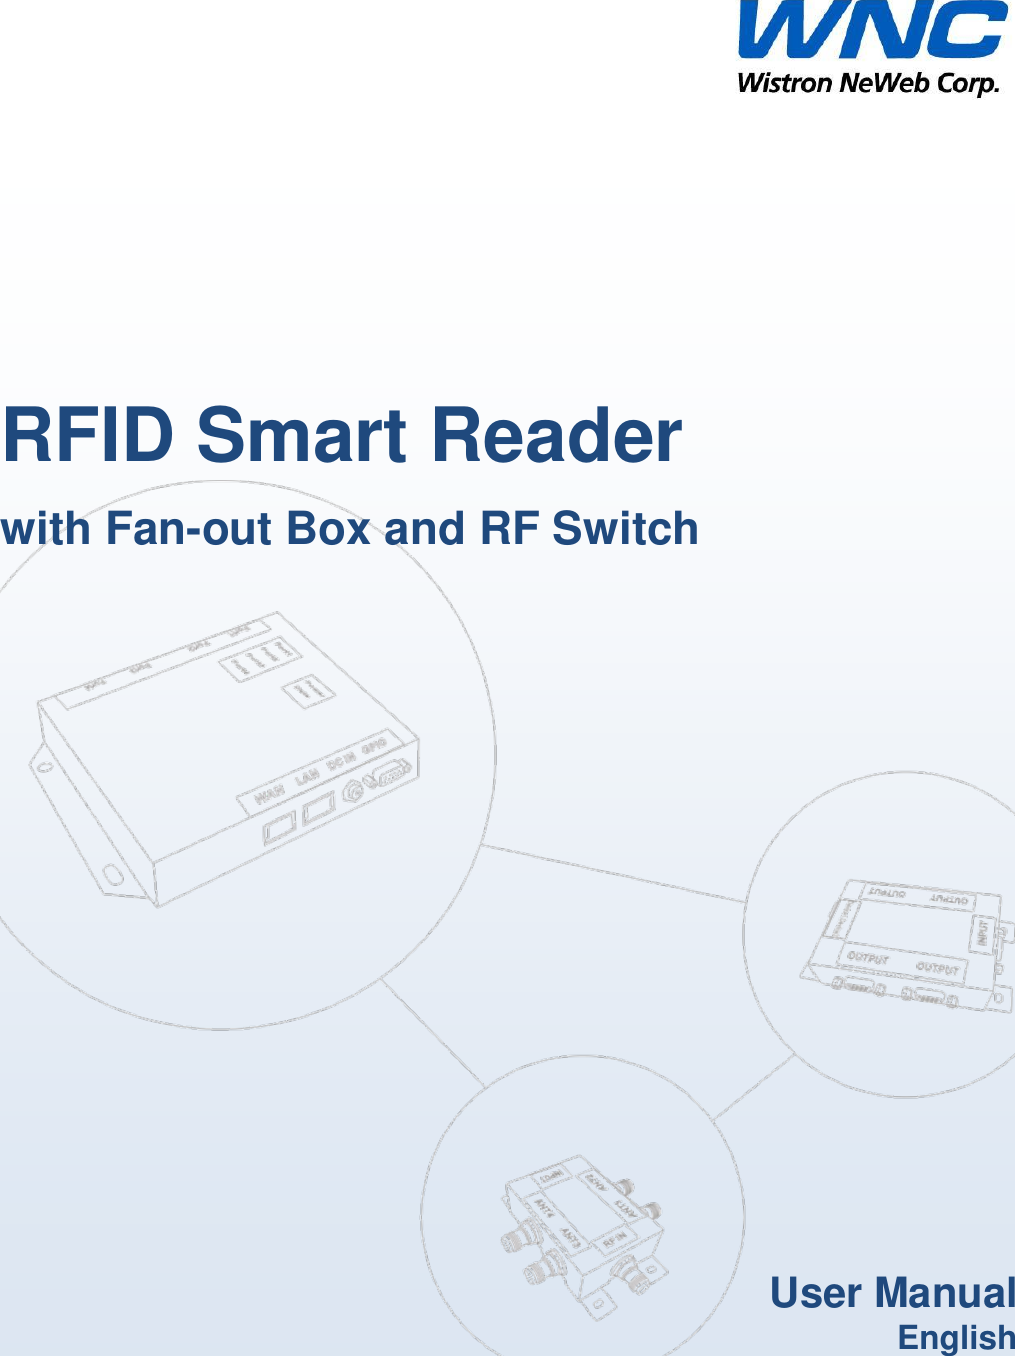                 RFID Smart Reader with Fan-out Box and RF Switch User Manual English 